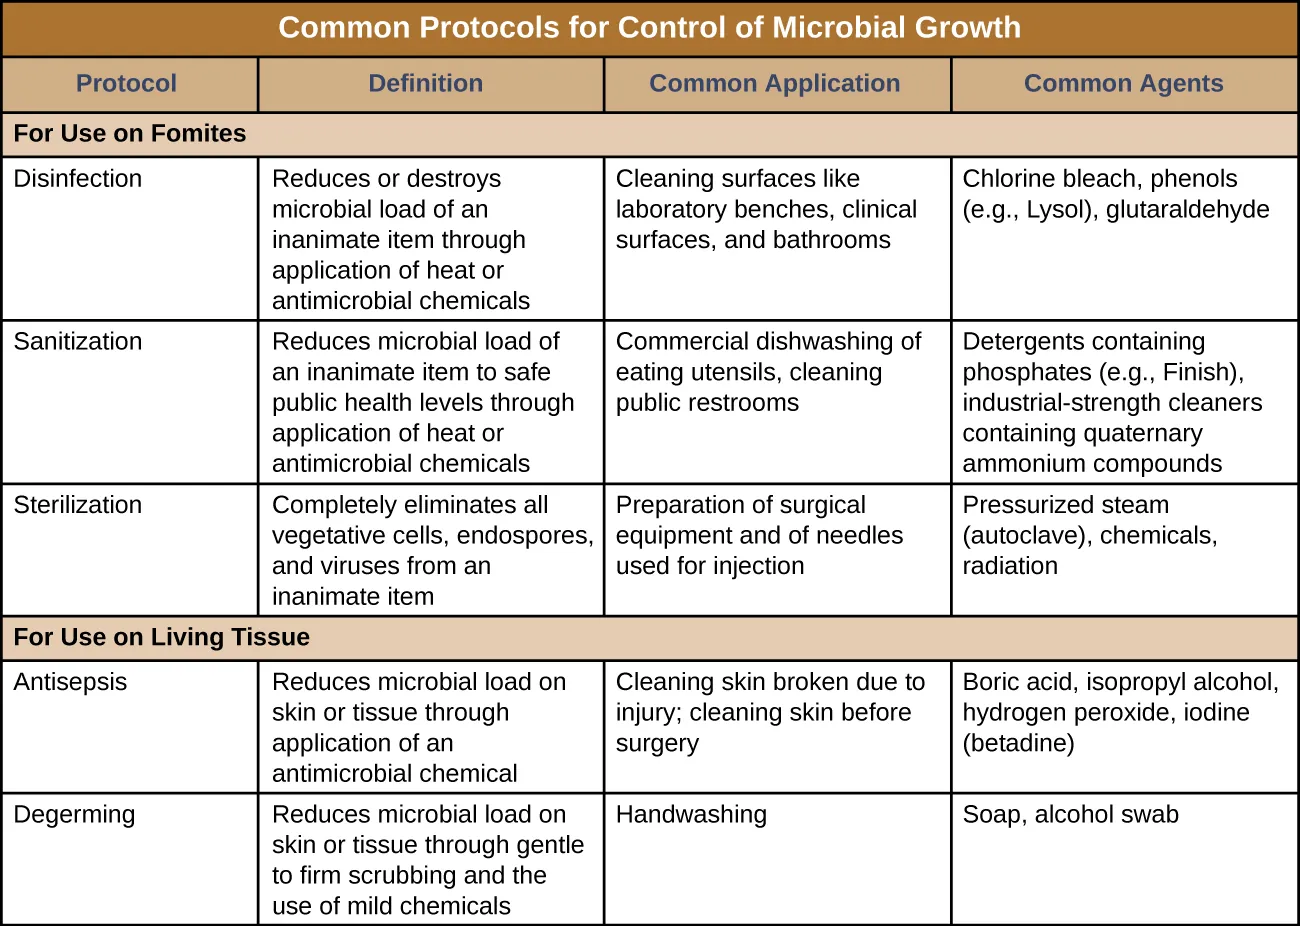 A table titled: Common protocols for control of microbial growth. Four columns: protocol, definition, common application and common agents. The table is divided by protocols used for fomites and those used on living tissue. Protocols for fomites include disinfection, sanitation, and sterilization. Disinfection reduces or destroys microbial load of an inanimate item through application of heat or antimicrobial chemicals. Disinfection involves cleaning surfaces like laboratory benches, clinical surfaces, and bathrooms and uses Chlorine bleach, phenols (e.g., Lysol), glutaraldehyde. Sanitization reduces microbial load of an inanimate item to safe public health levels through application of heat or antimicrobial chemicals. Sanitation involves Commercial dishwashing of eating utensils, cleaning public restrooms and uses Detergents containing phosphates (e.g., Finish), industrial-strength cleaners containing quaternary ammonium compounds. Sterilization Completely eliminates all vegetative cells, endospores, and viruses from an inanimate item. Sterilization involves Preparation of surgical equipment and of needles used for injection and uses Pressurized steam (autoclave), chemicals, radiation.  Protocols for living tissue include antisepsis and degerming. Antisepsis Reduces microbial load on skin or tissue through application of an antimicrobial chemical. Antisepsis involves Cleaning skin broken due to injury; cleaning skin before surgery and uses Boric acid, isopropyl alcohol, hydrogen peroxide, iodine (betadine). Degerming Reduces microbial load on skin or tissue through gentle to firm scrubbing and the use of mild chemicals. Degerming involves Handwashing and uses Soap, alcohol swab.